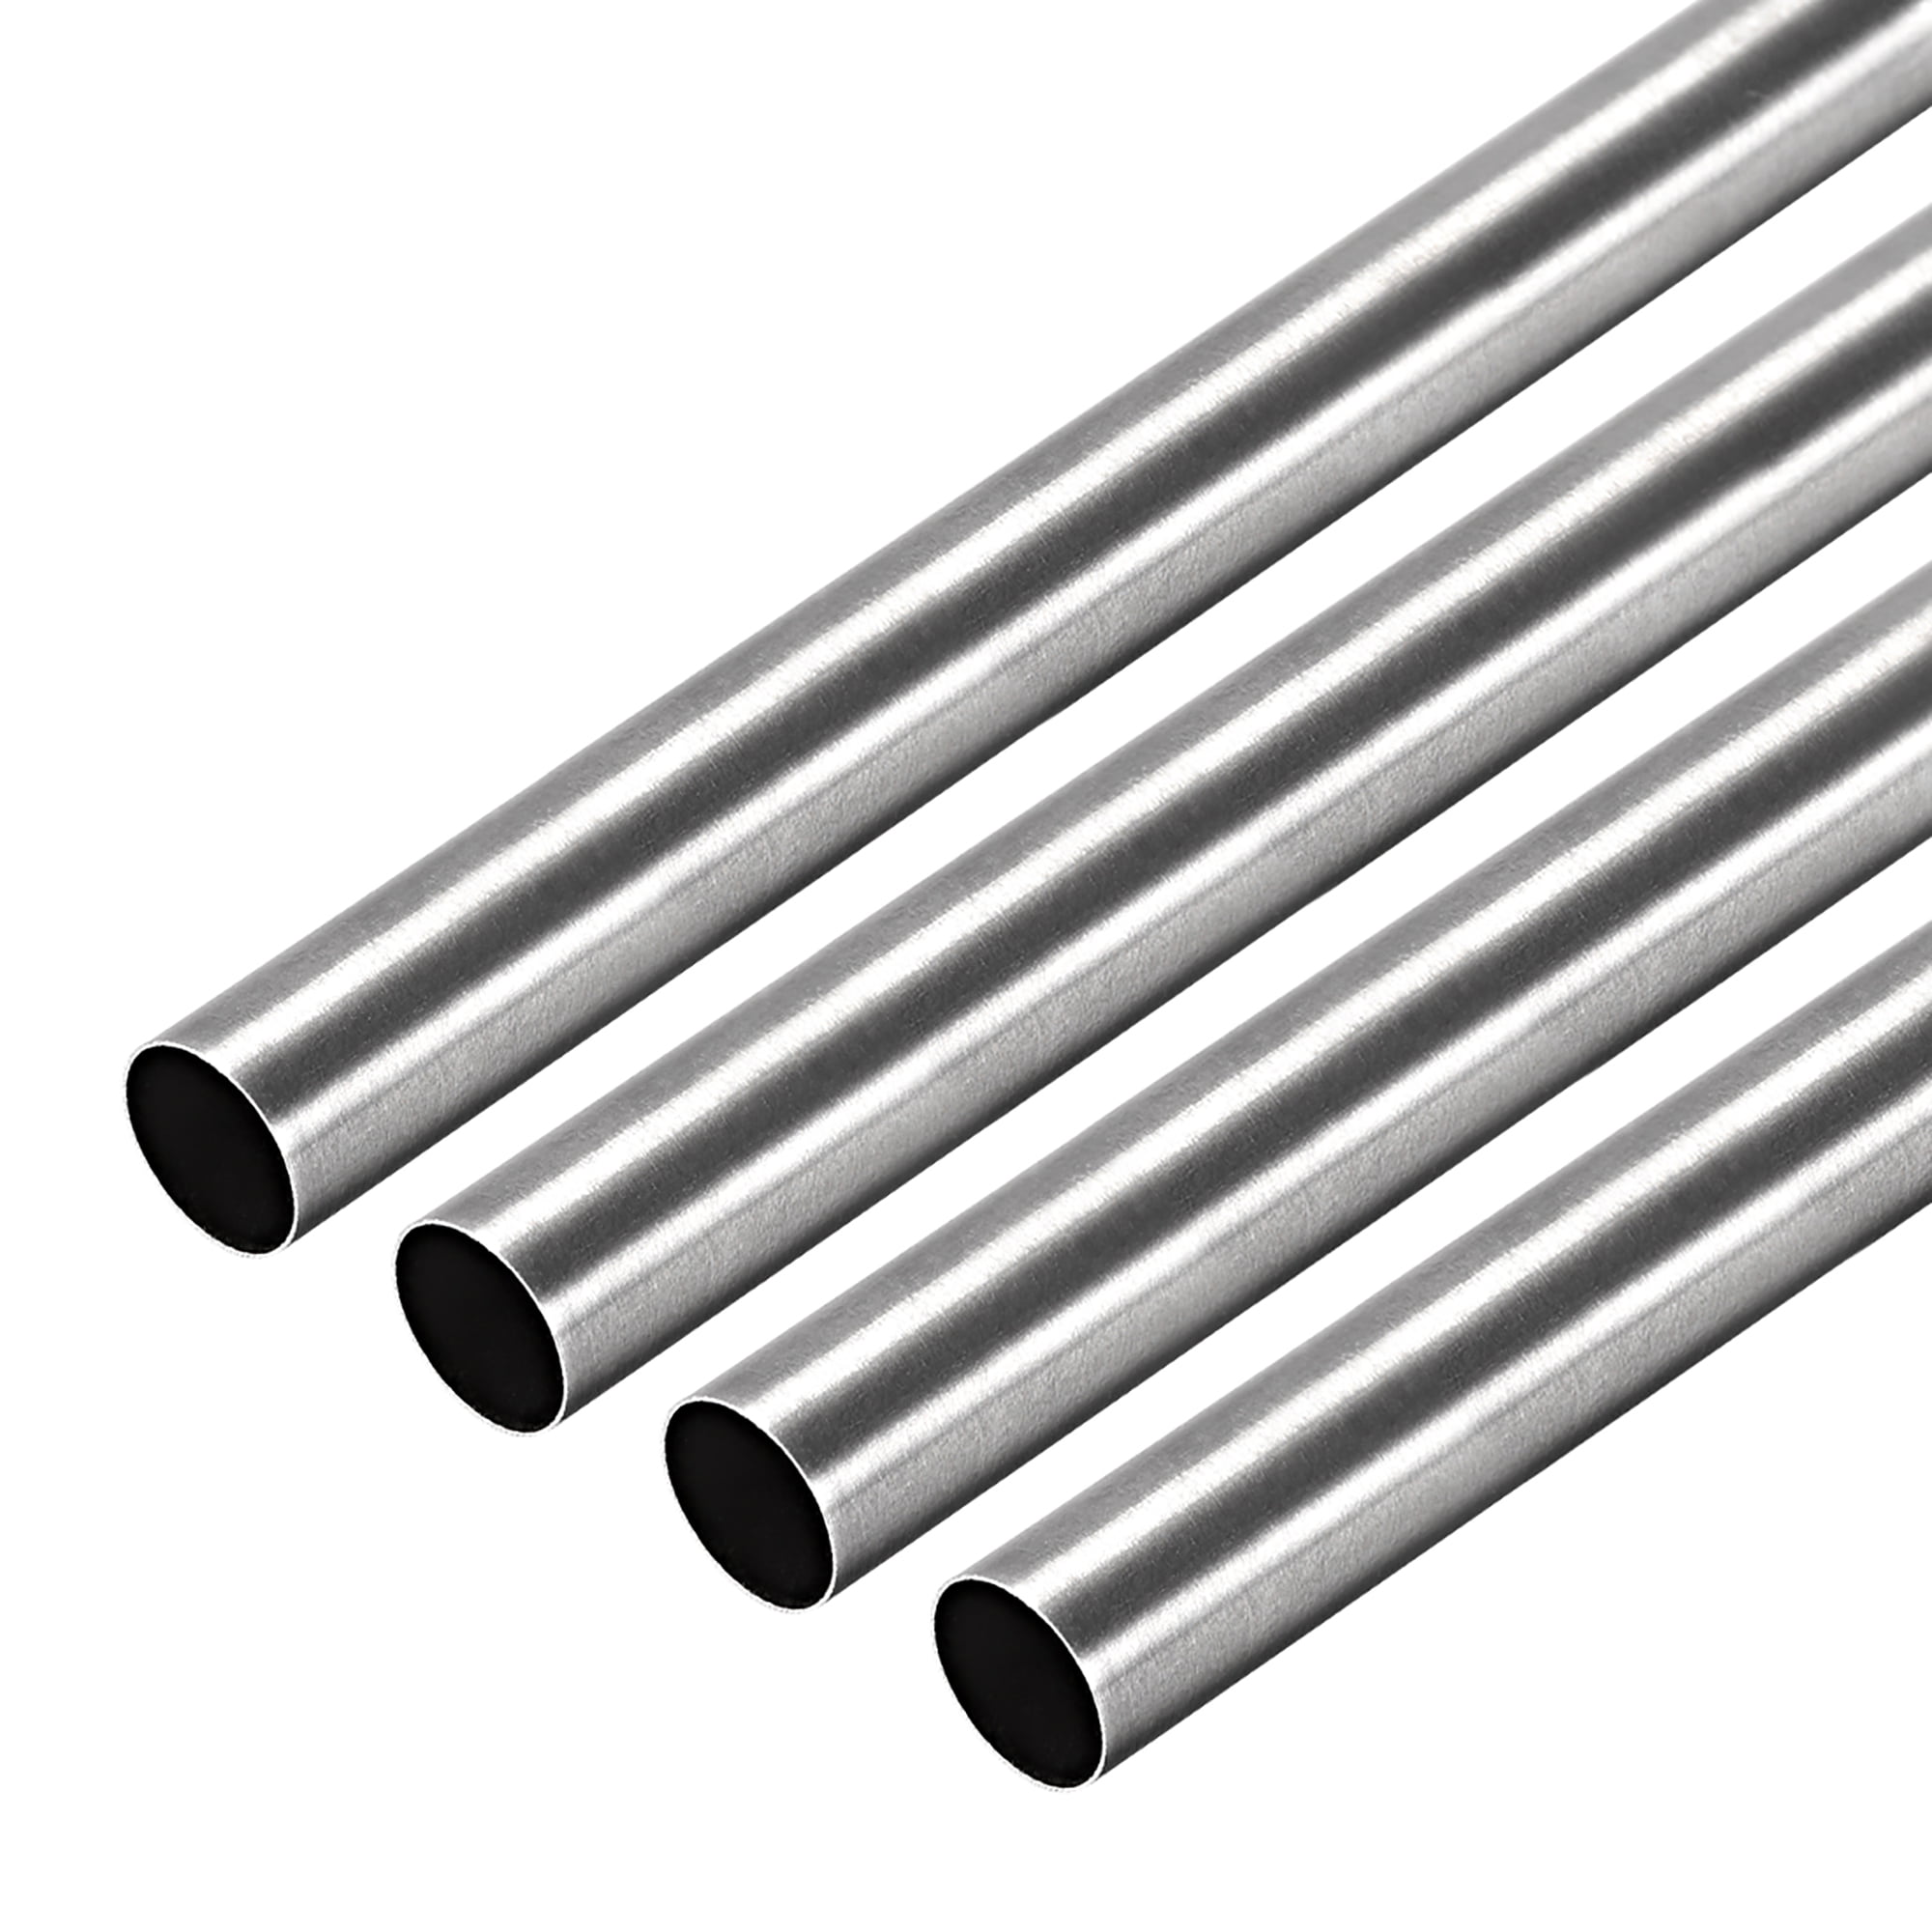 304 Stainless Steel Round Tubing 250mm Length 9mm OD 0.2mm Wall 1.9 Od Stainless Steel Tubing